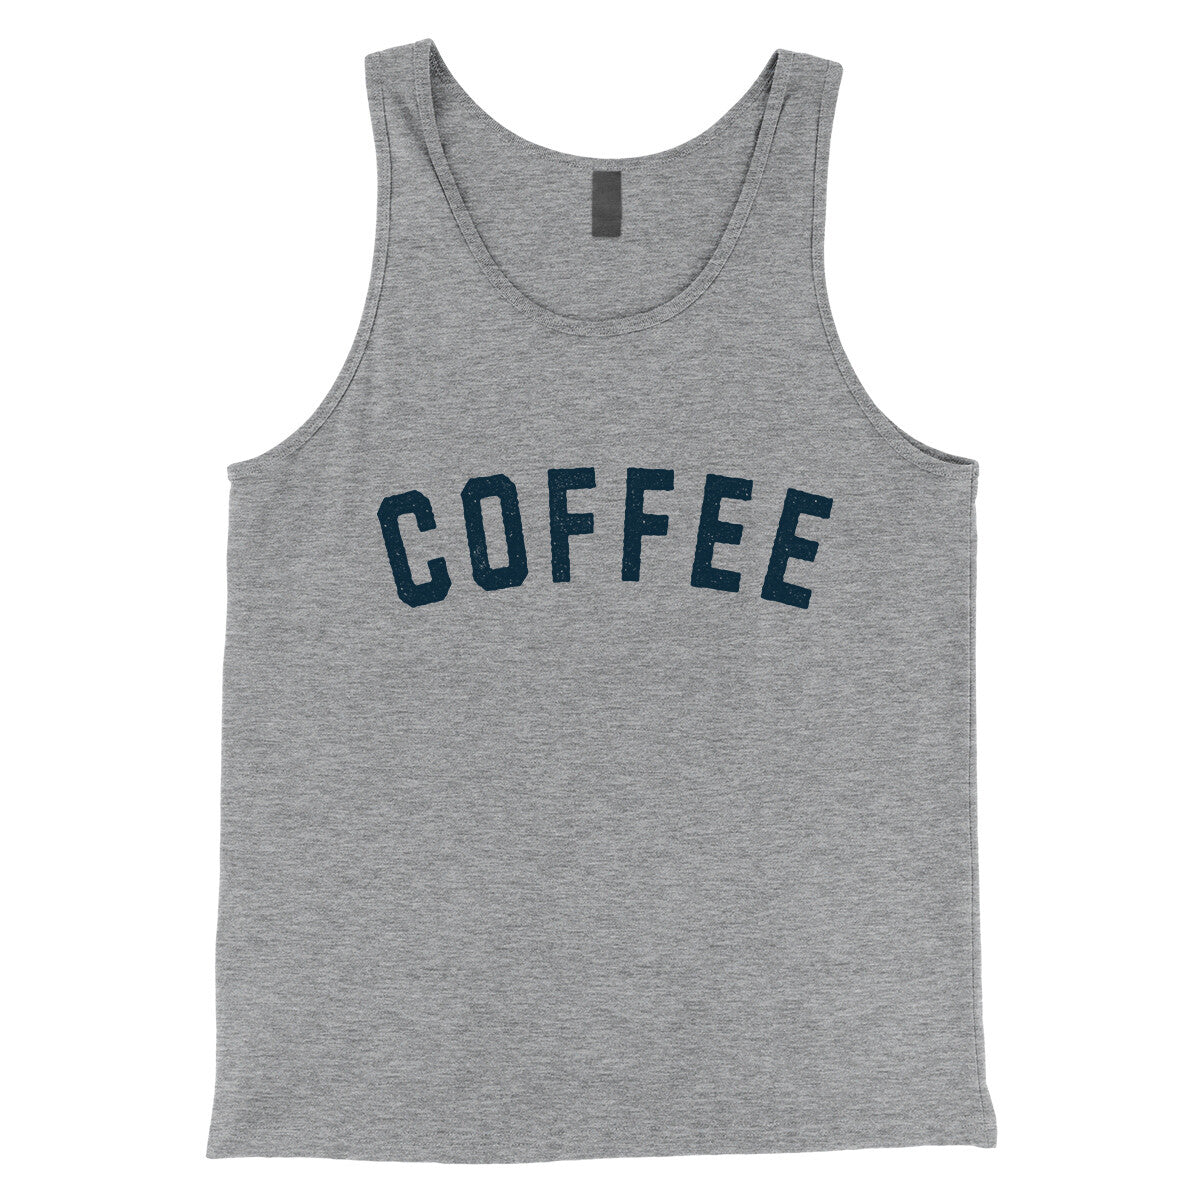 Coffee in Athletic Heather Color